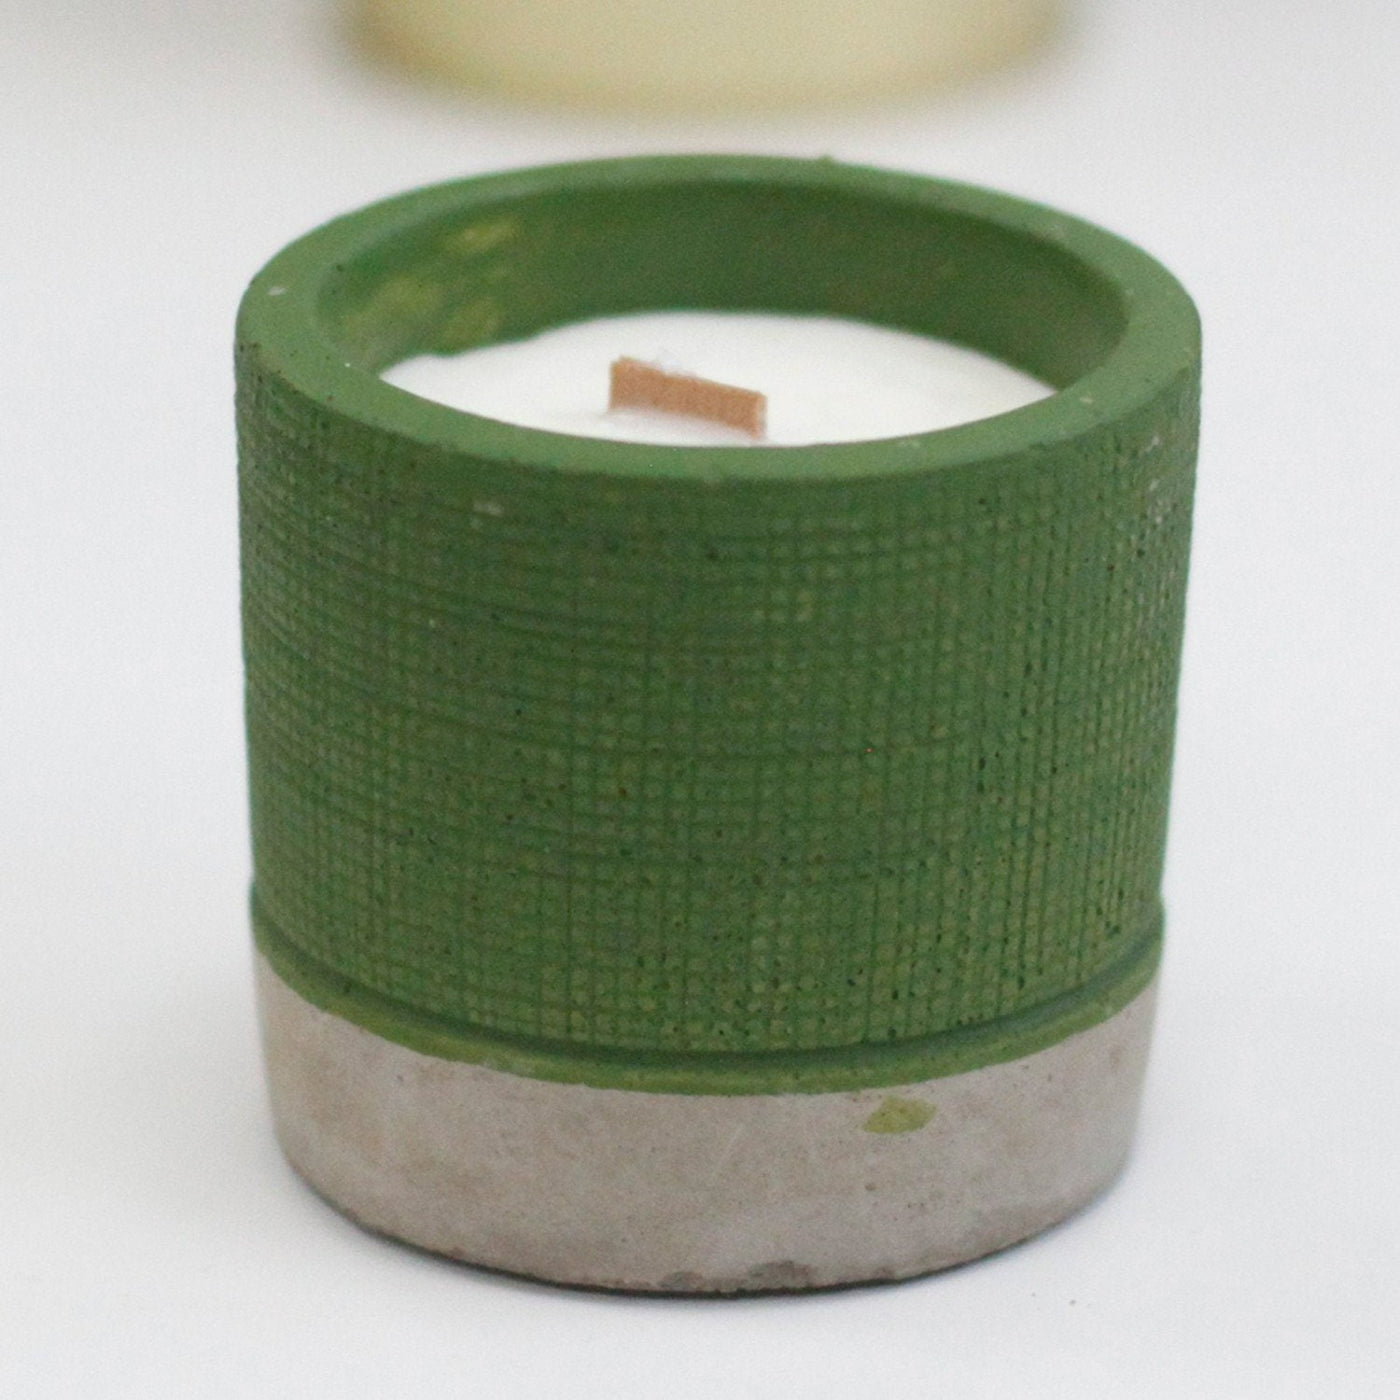 Green Wooden Wick Concrete Candle Gift Box Sea Moss & Herbs.